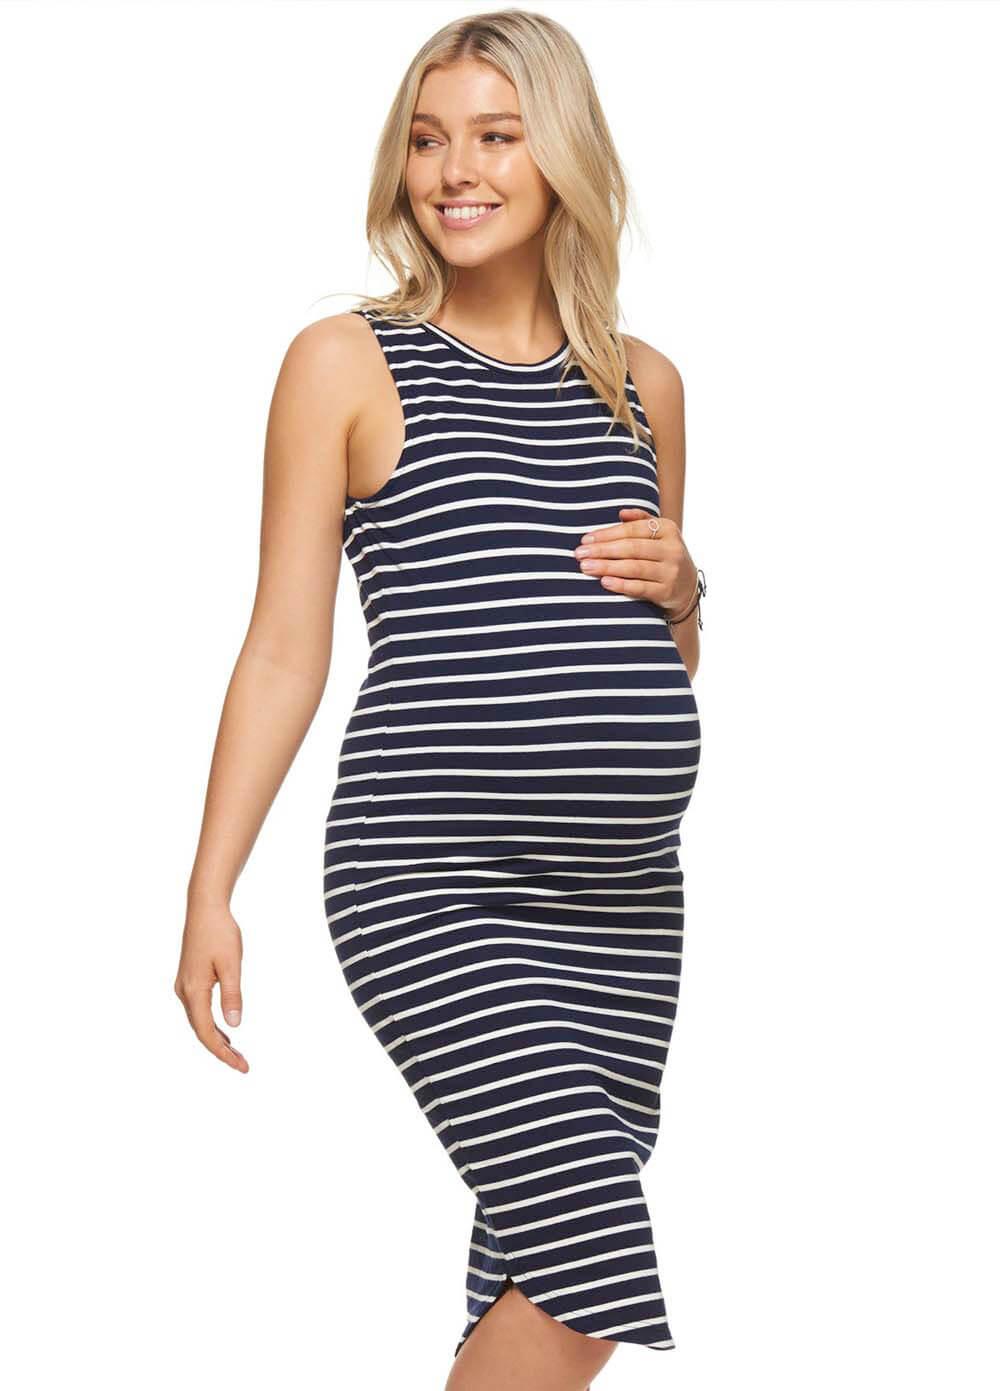 More Than Words Maternity Dress in Navy/White Stripes by Bae